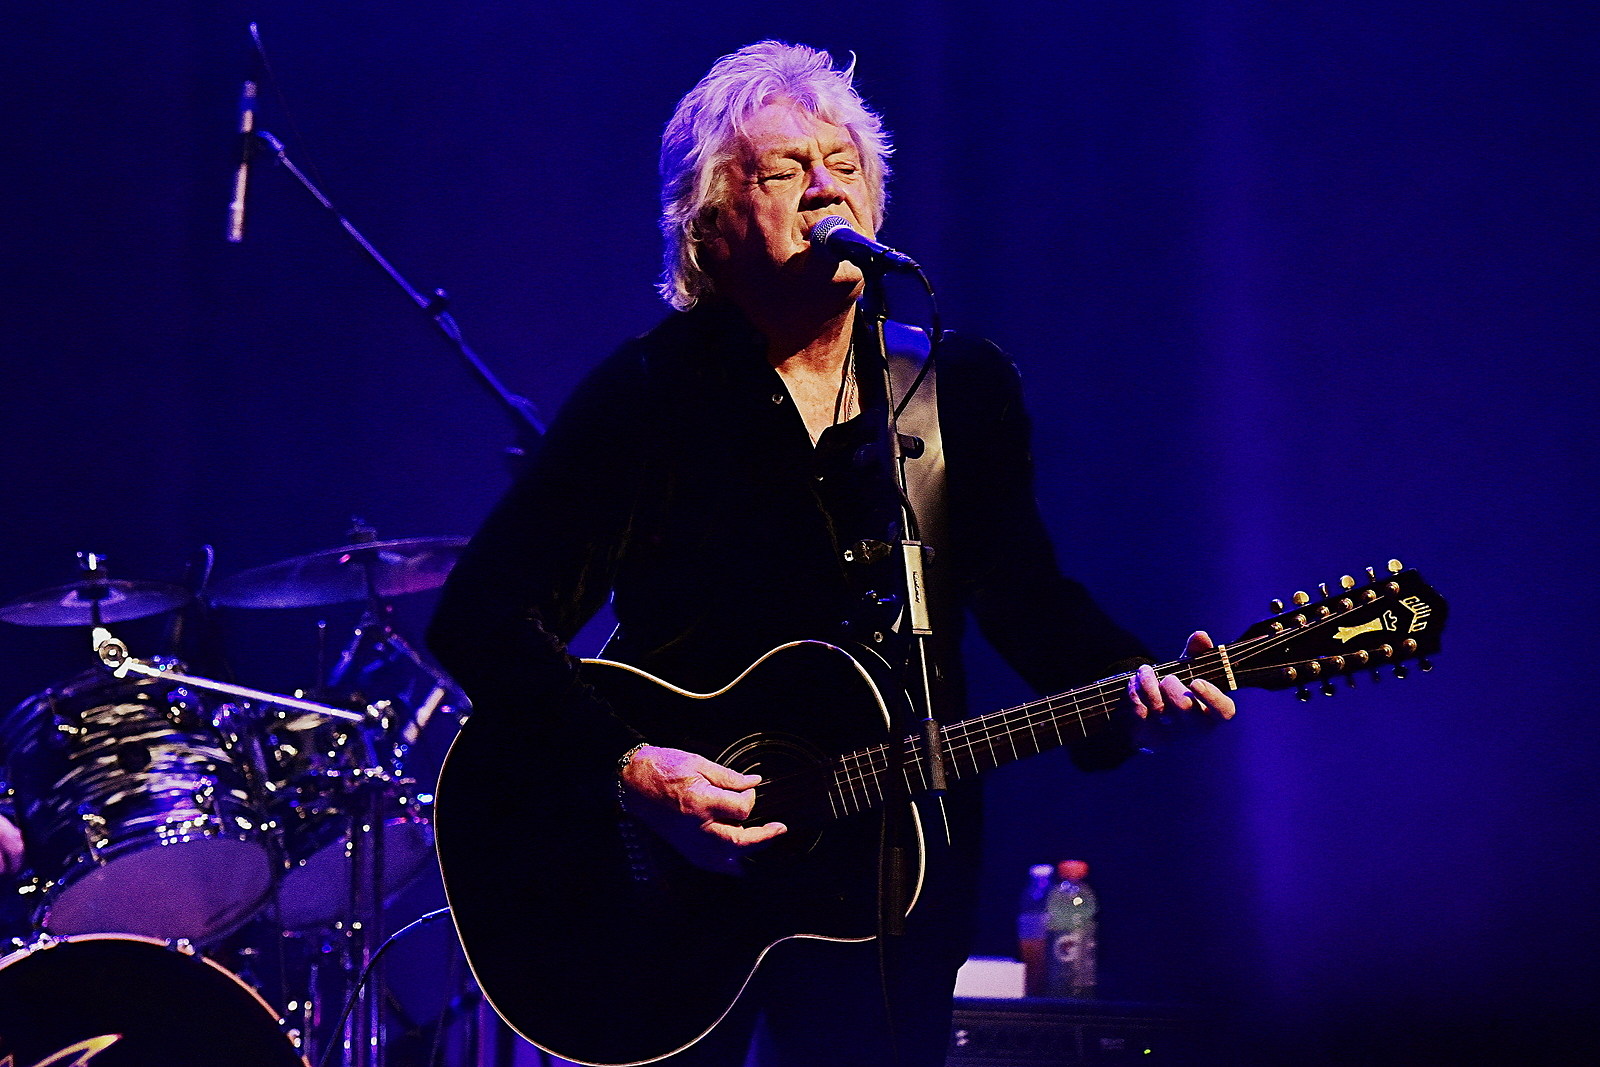 John Lodge’s ‘Incredible Journey’ With Moody Blues in Five Songs